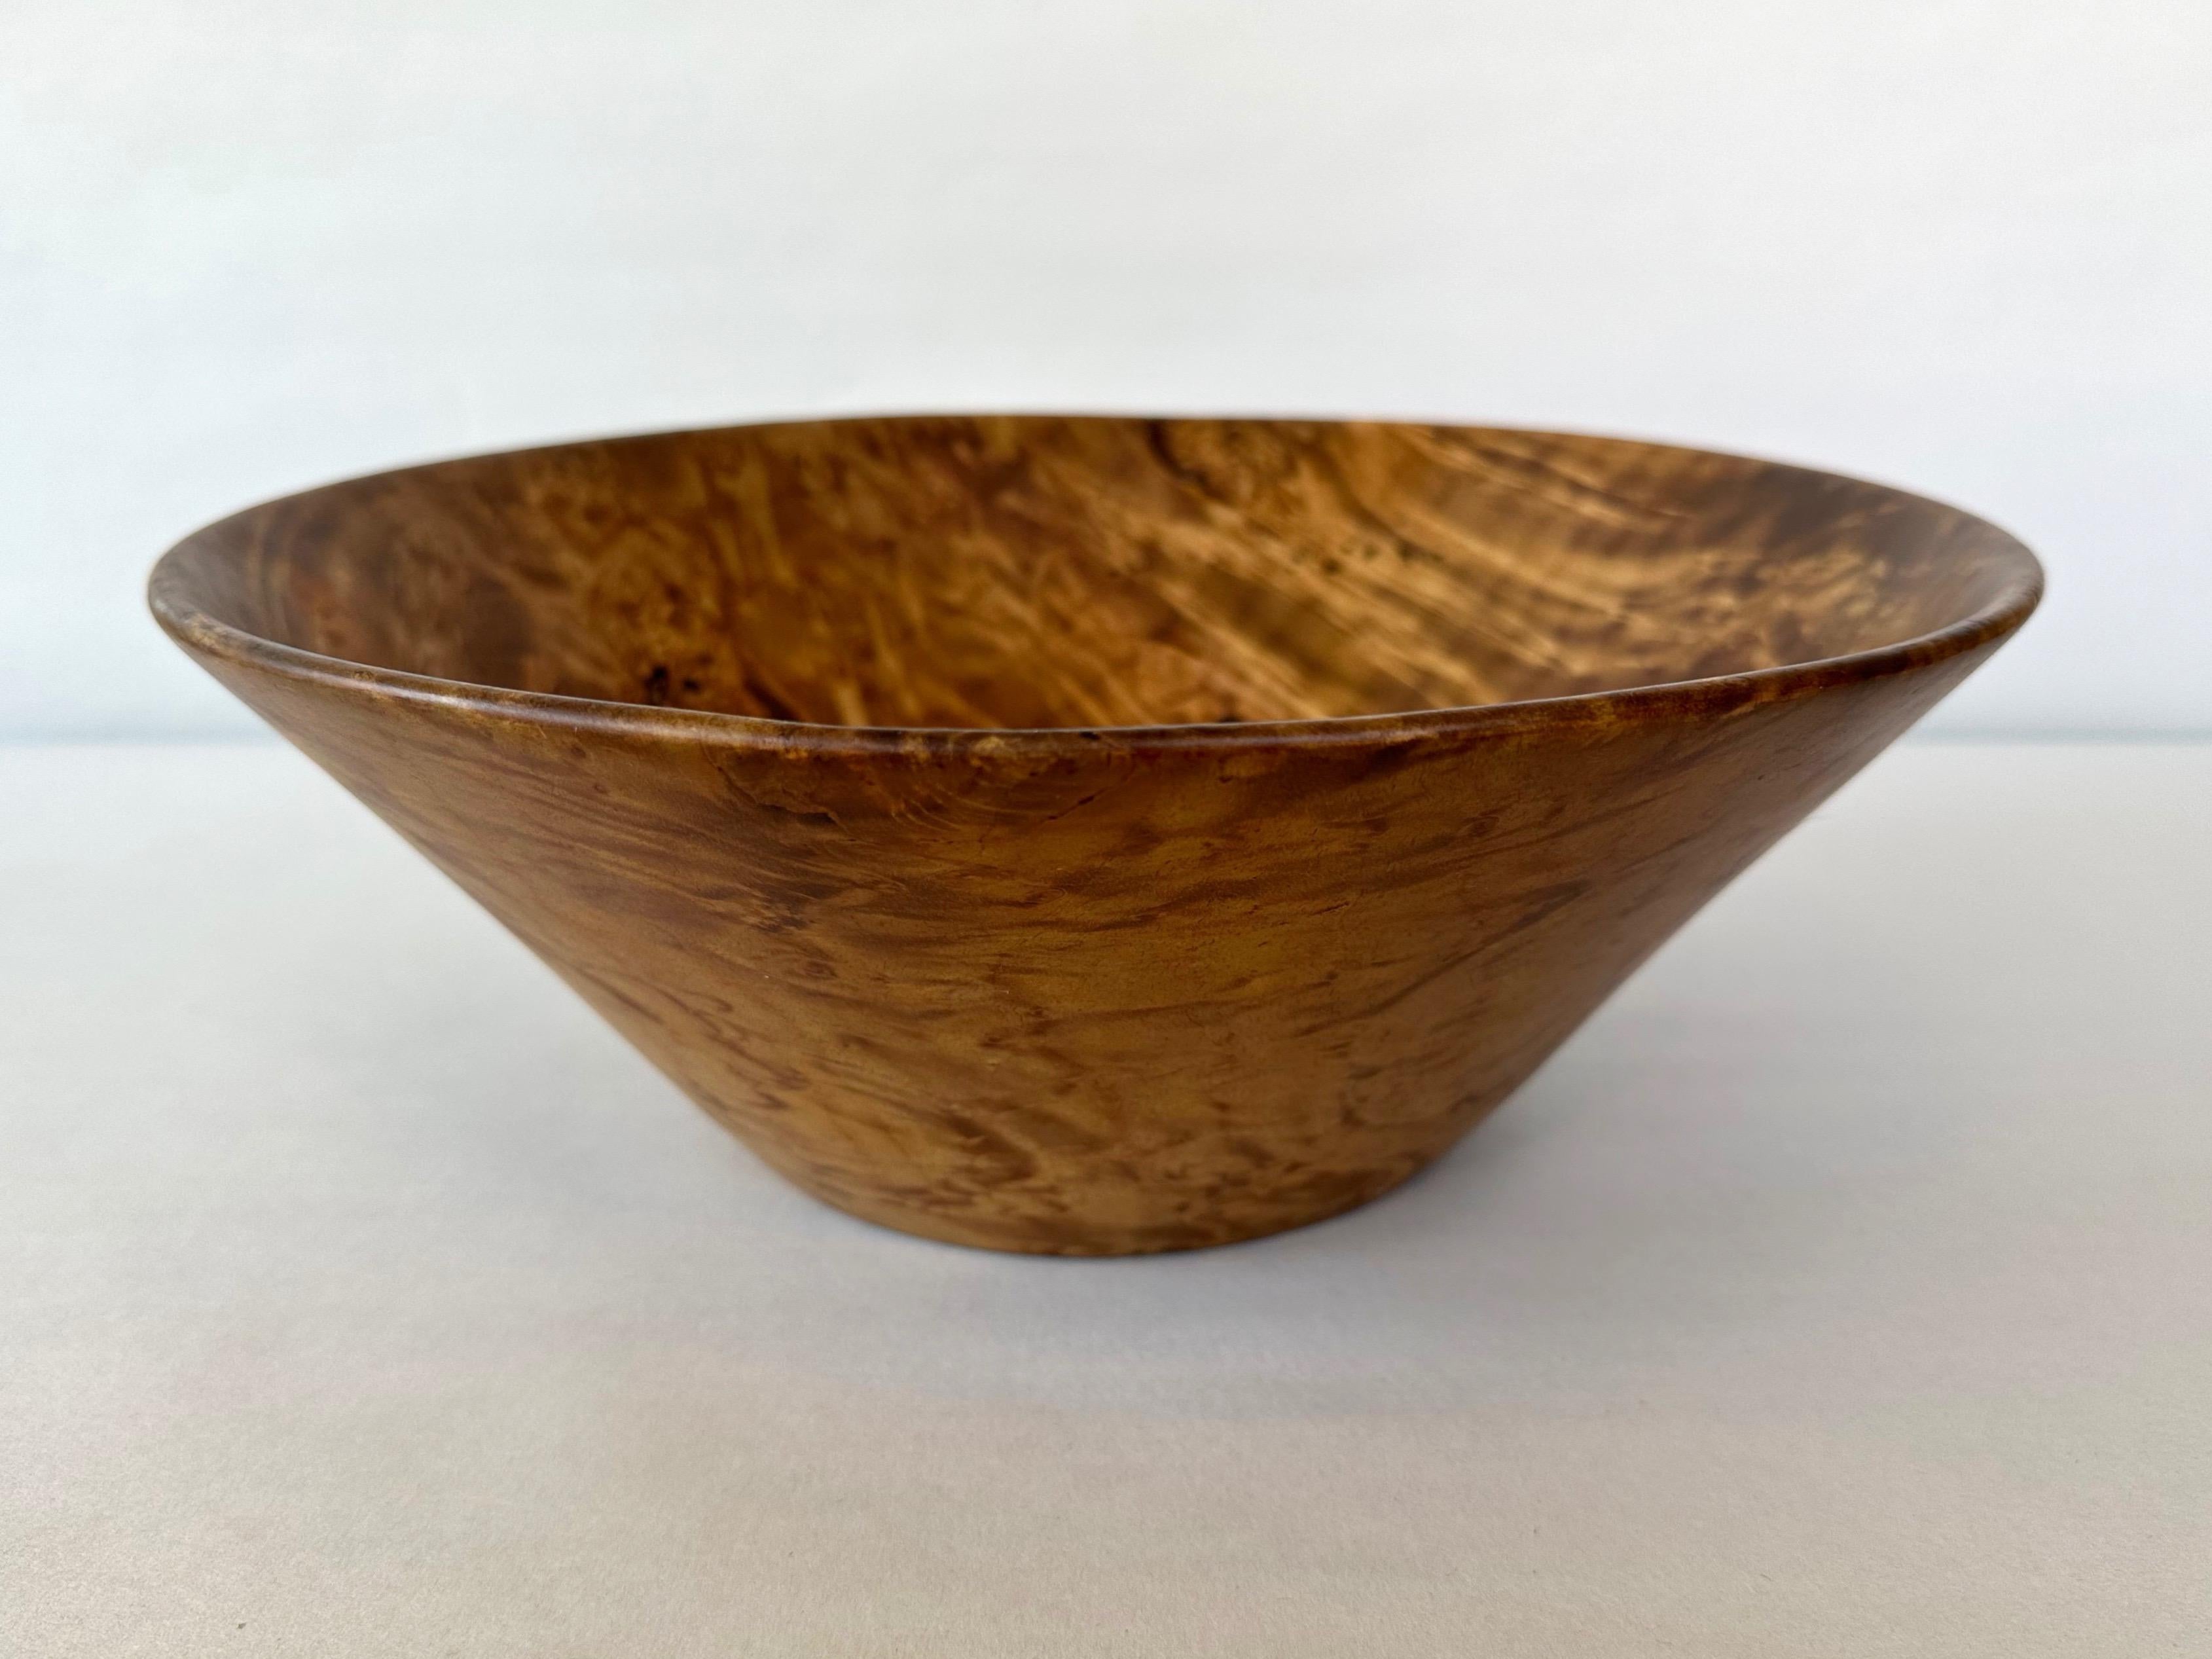 American Bruce Mitchell Bay Laurel Burl Turned Wood Bowl, 1979 For Sale